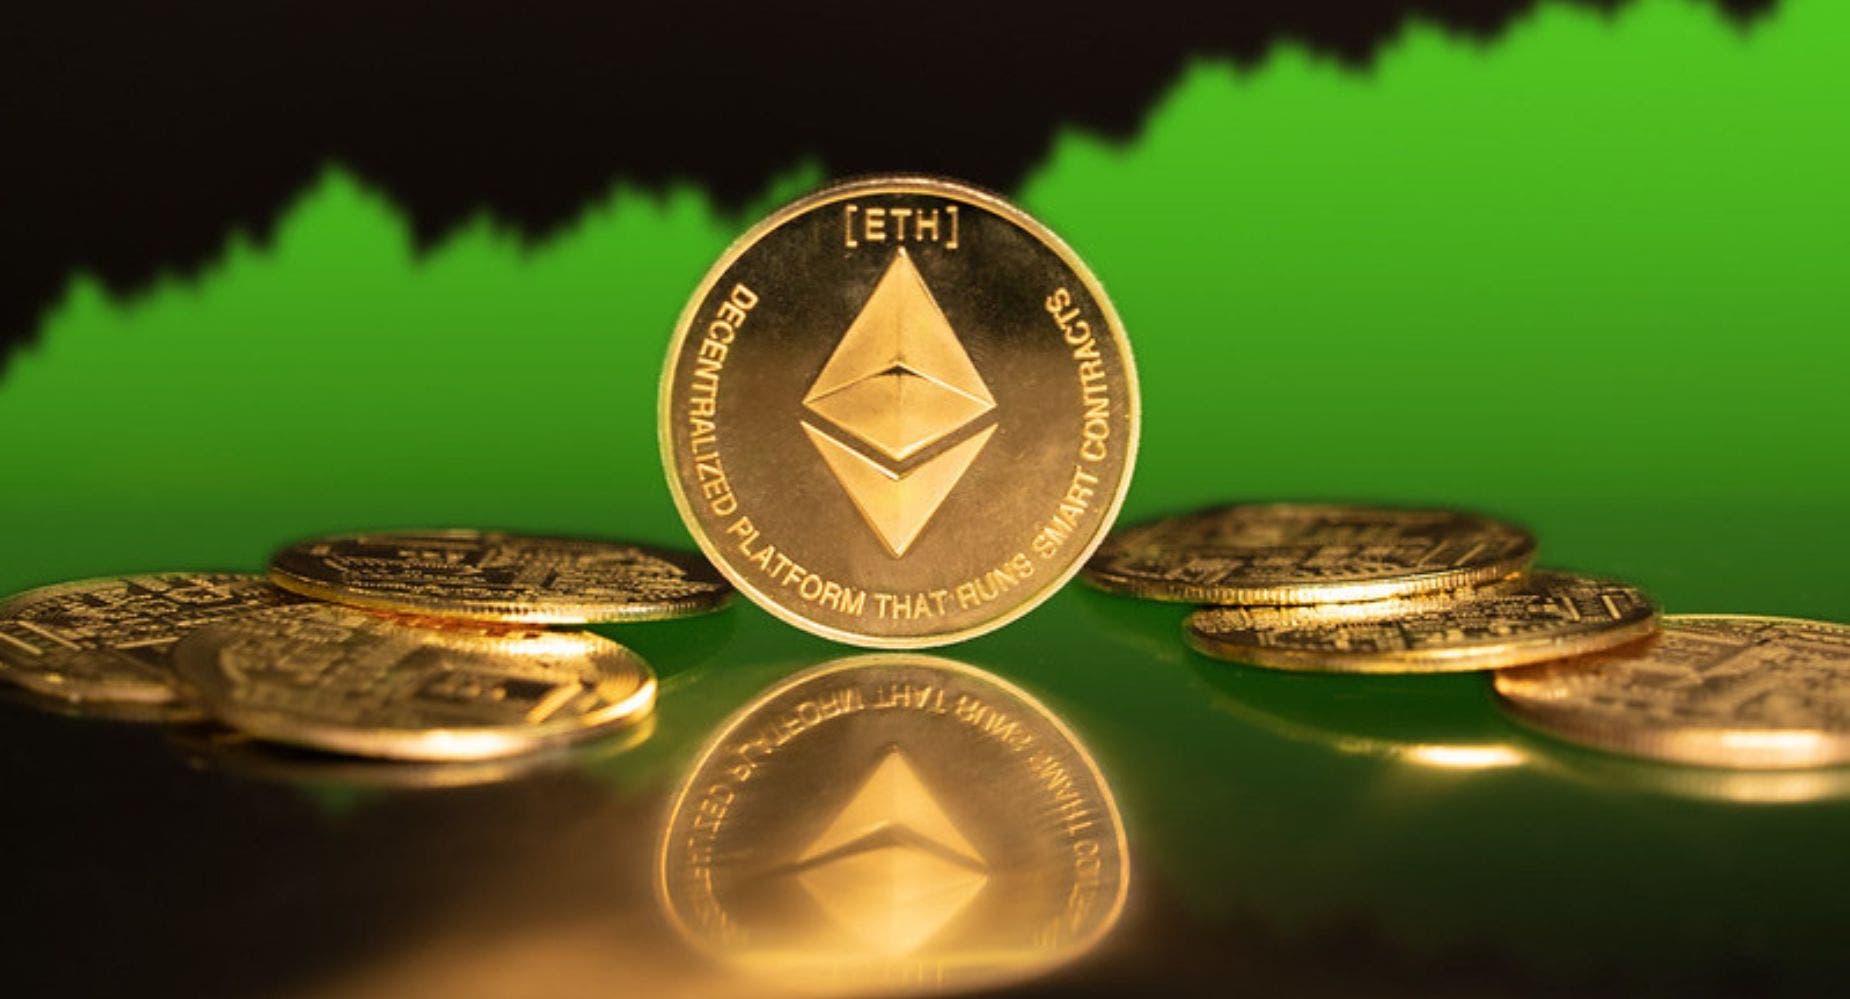 Ethereum Tops $2,000 First Time In 2 Months, Up 121% From Mid-June Lows: What's Driving The Rally?